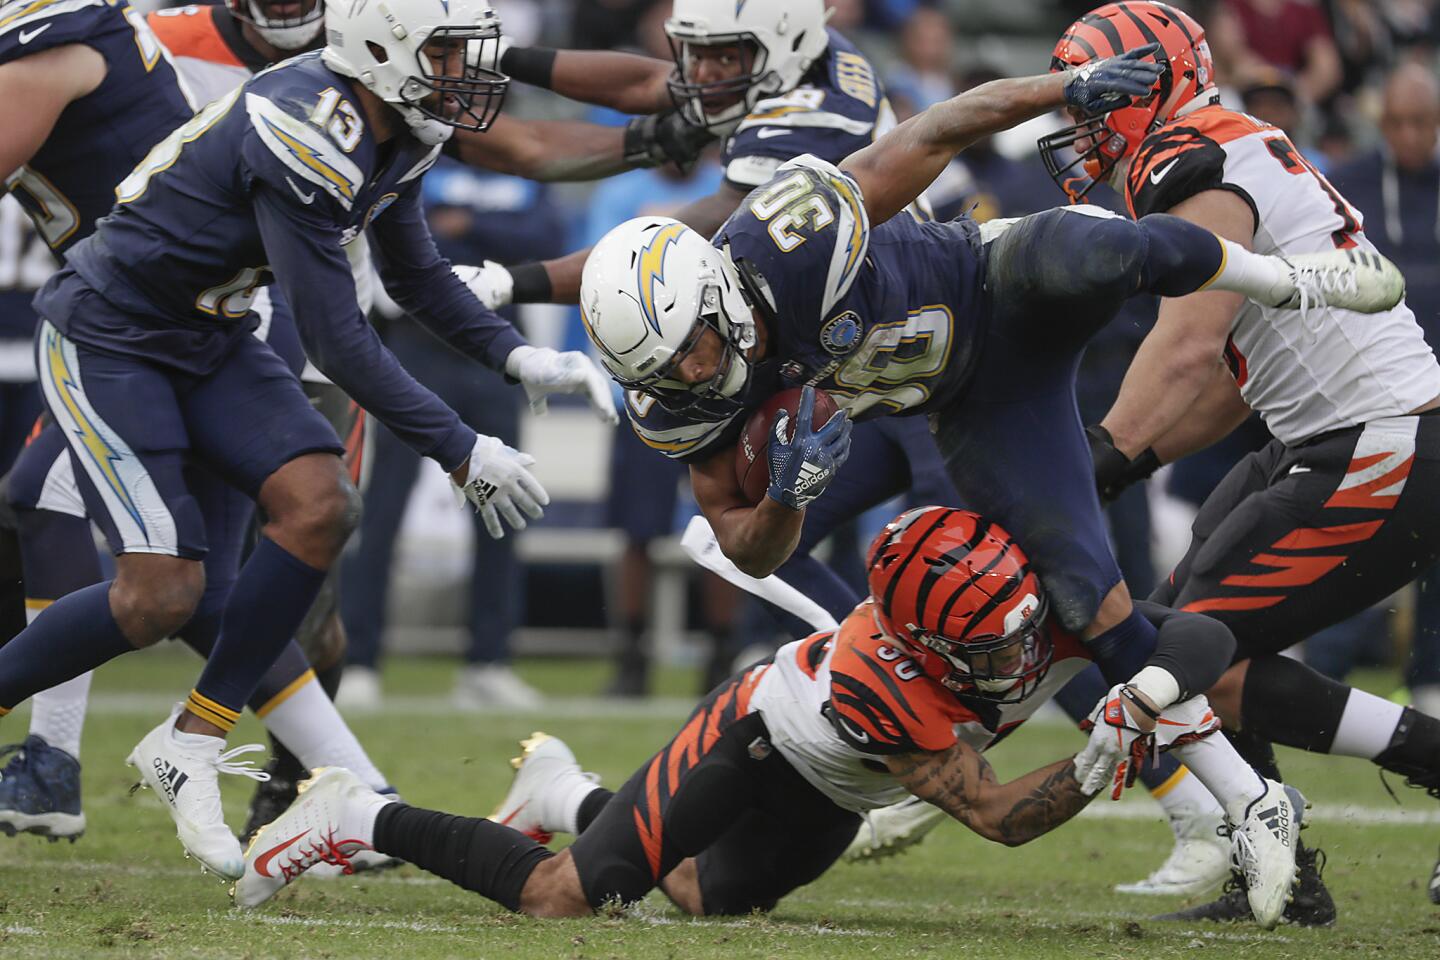 Chargers running back Austin Ekeler is stopped for a short gain by Bengals linebacker Jordan Evans.